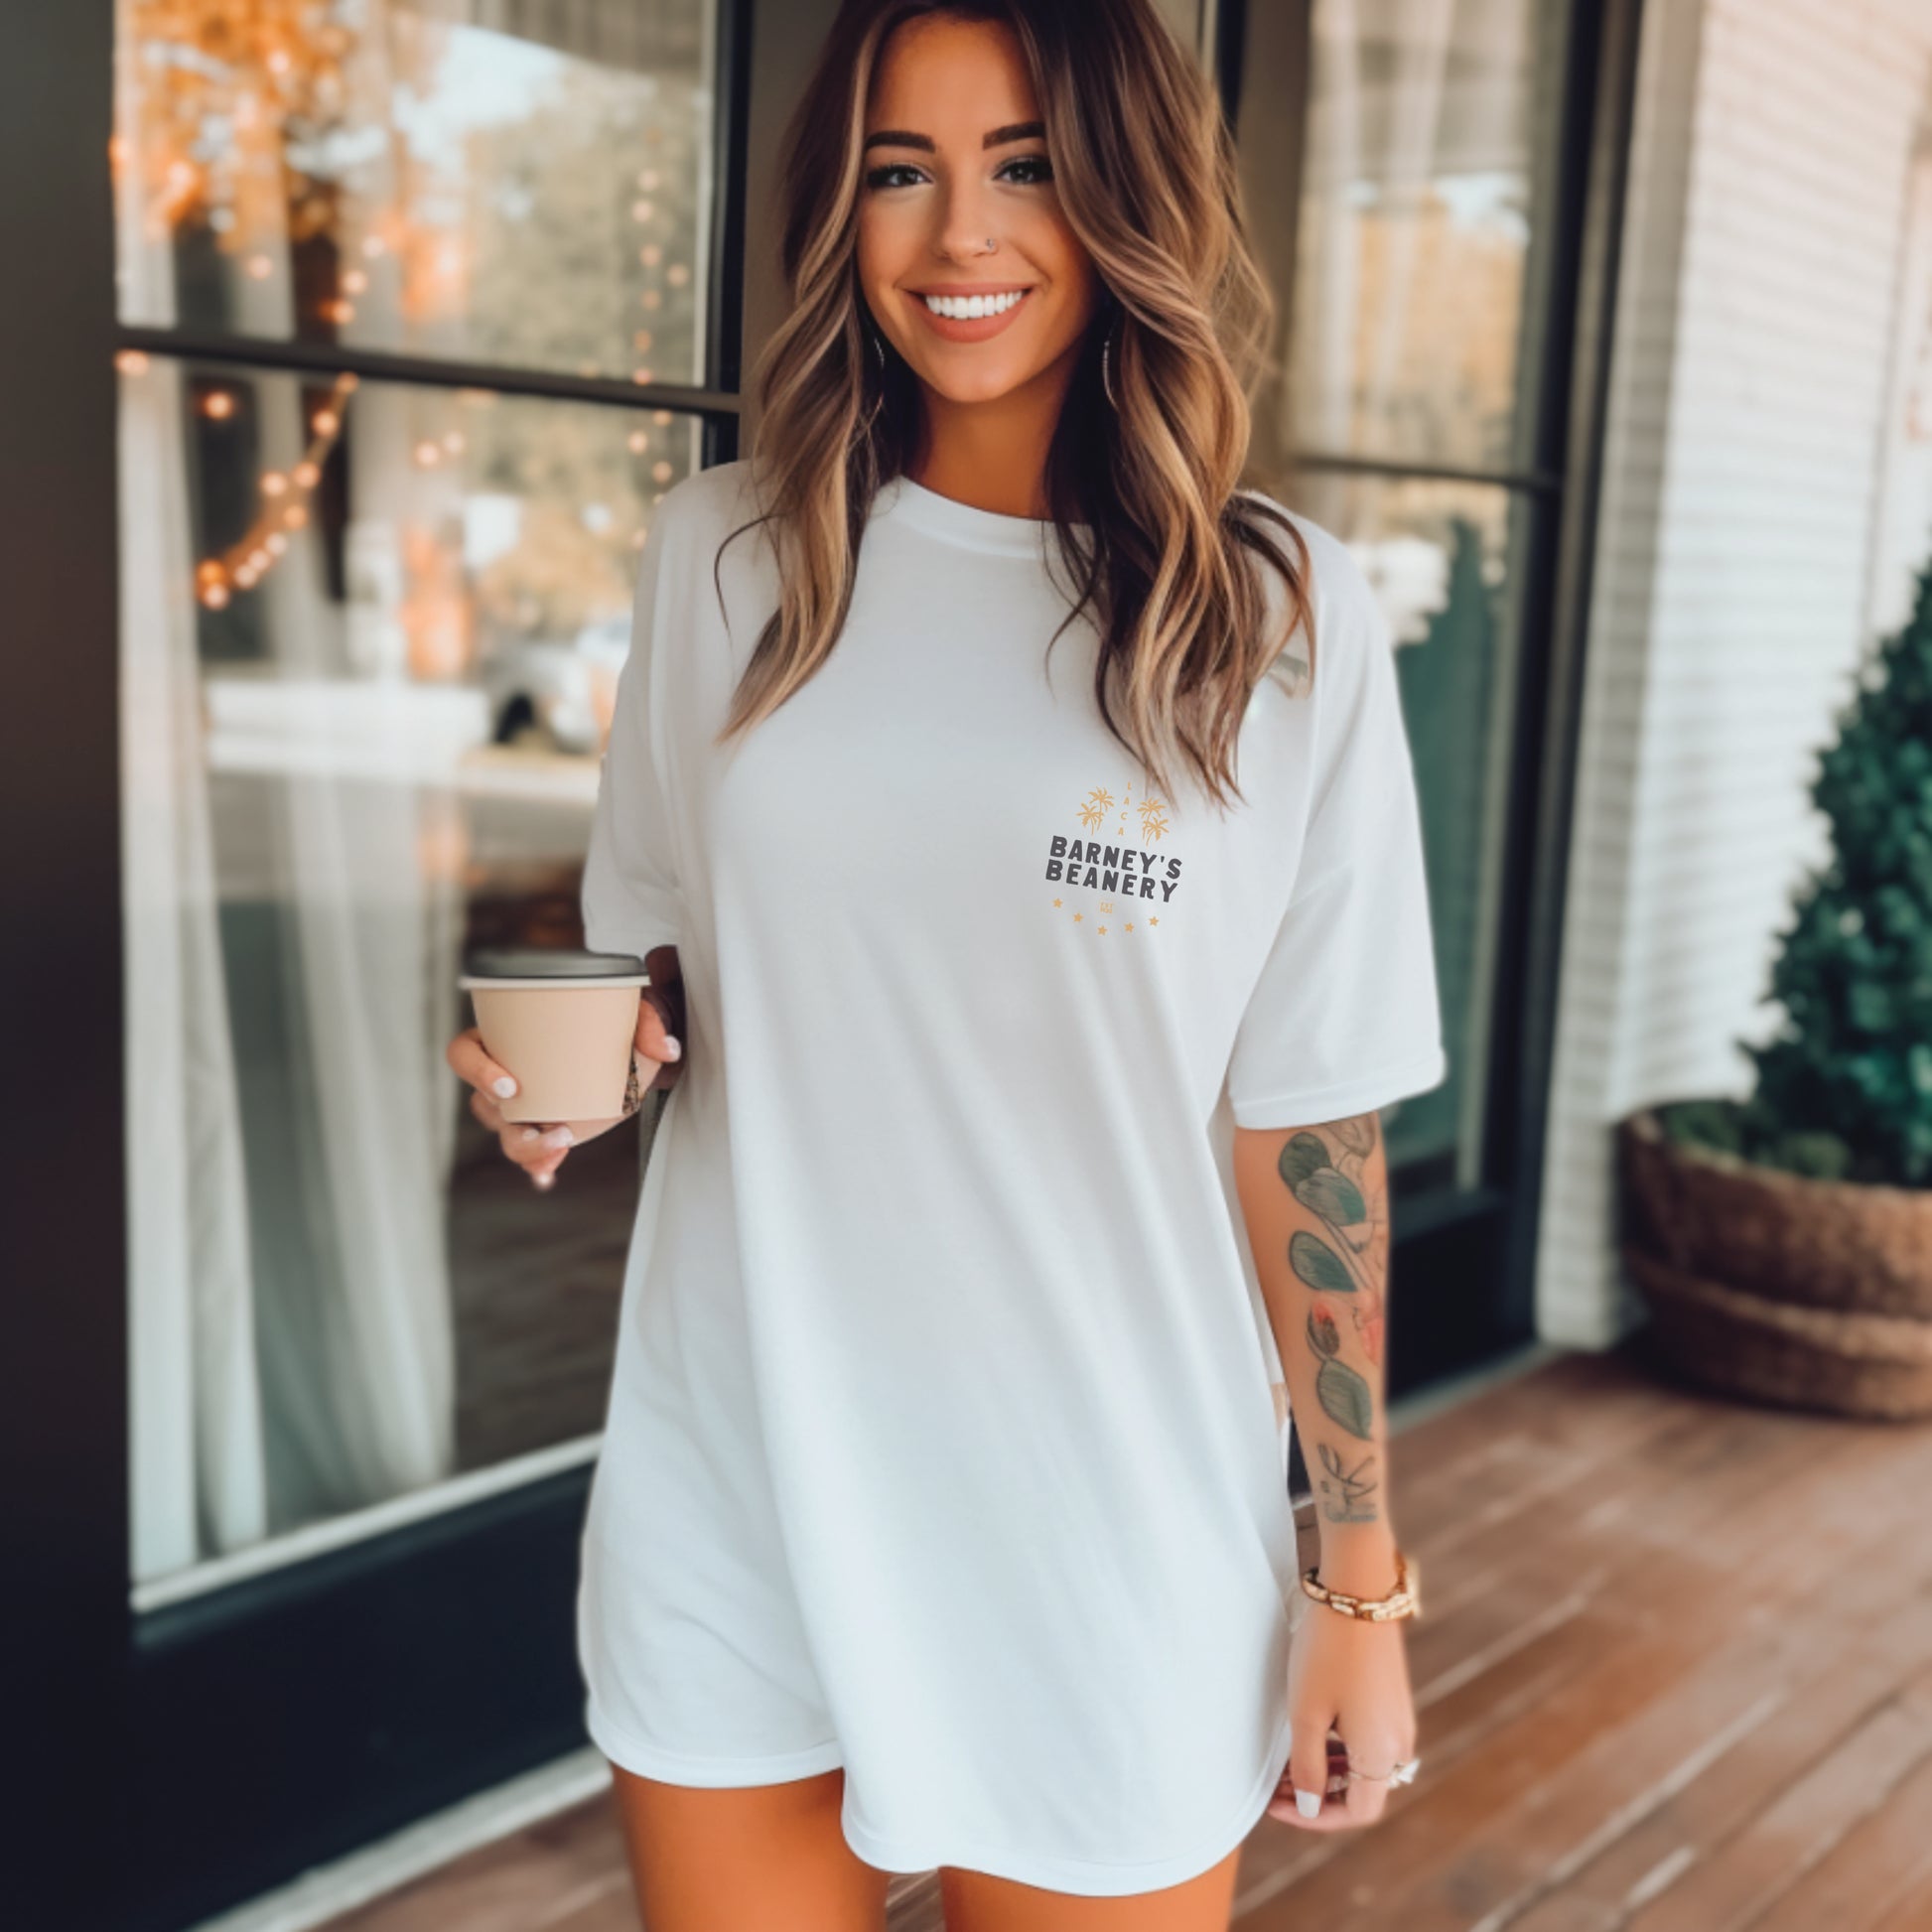 All Roads Lead To | BARNEY'S BEANERY - Women's Graphic Tee | White Bella+Canvas 3001 T-Shirt - Badge Graphic On Front View Of Female Lifestyle Image